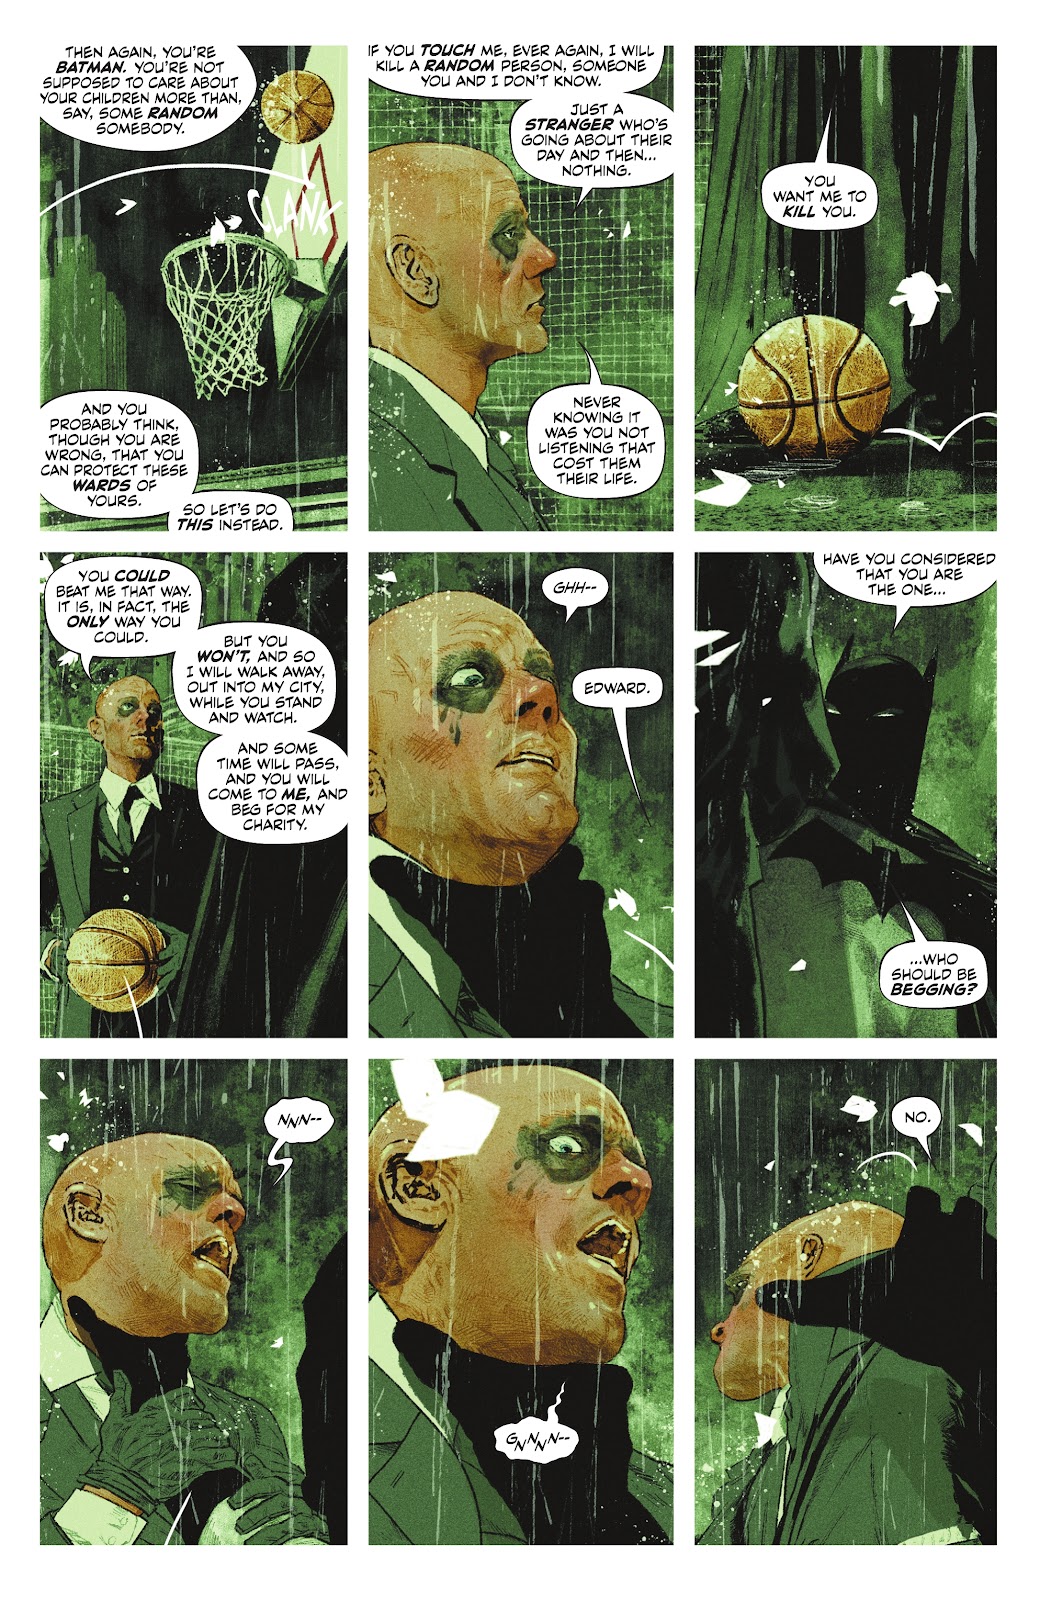 Batman: One Bad Day - The Riddler issue 1 - Page 55